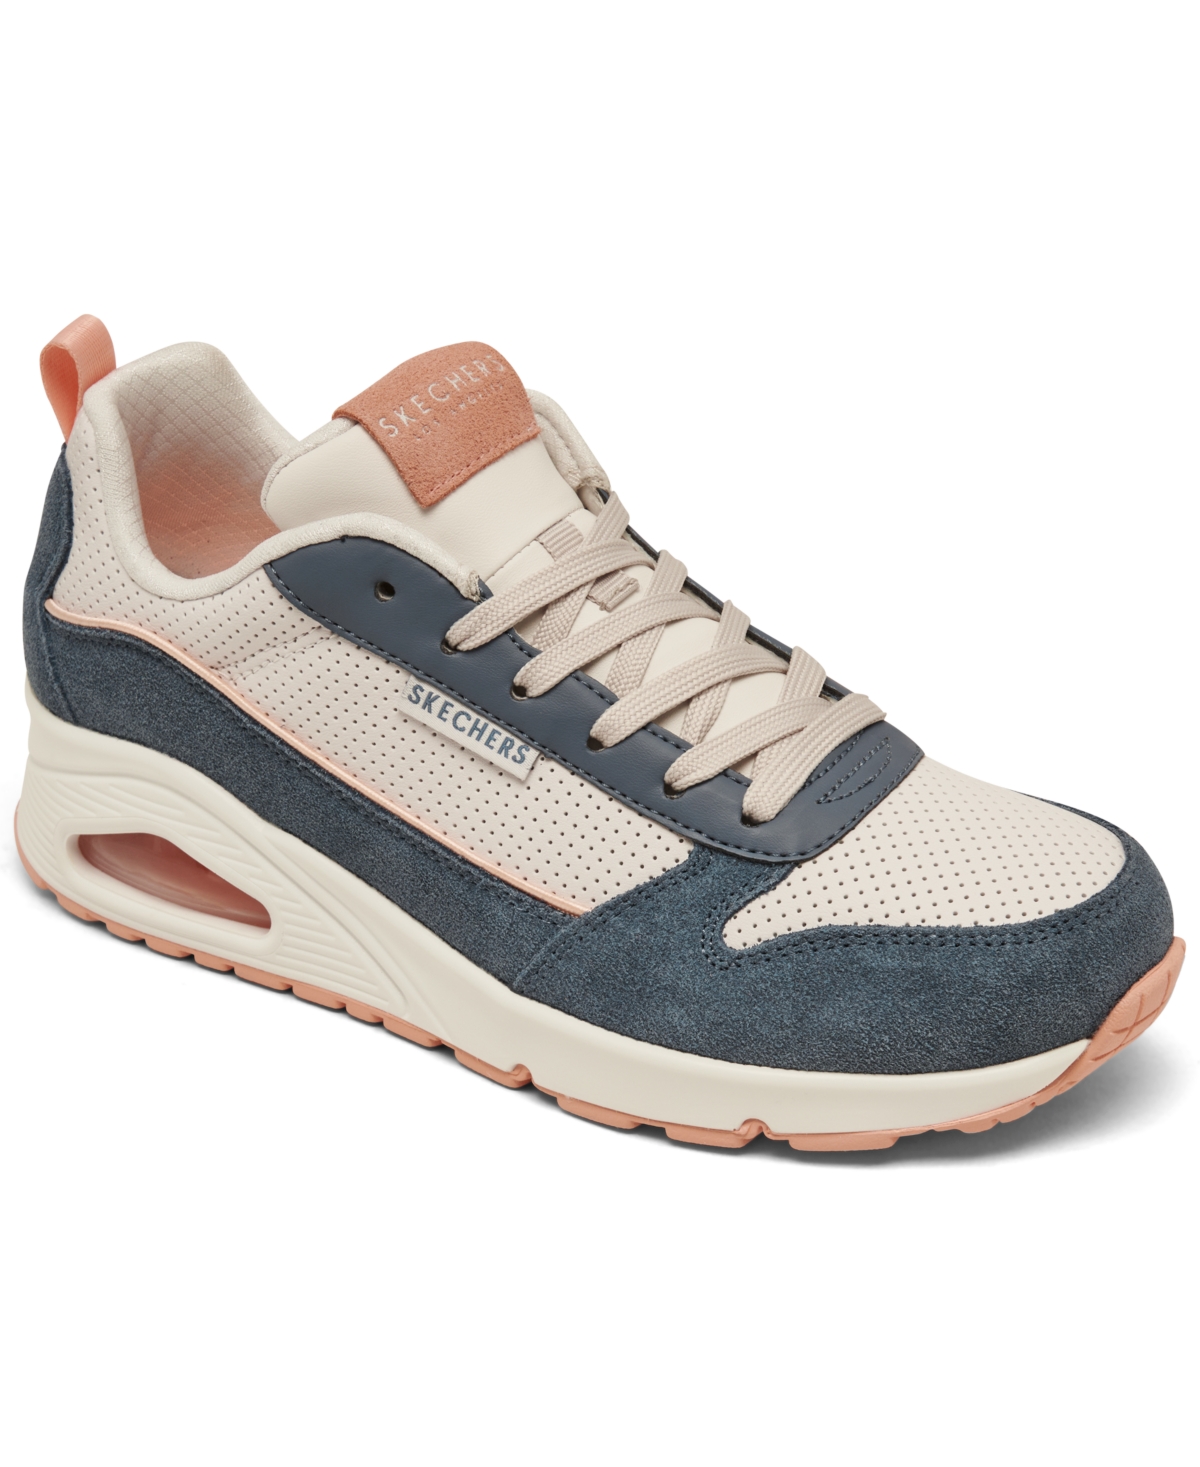 Women's Street Uno 2 Much Fun Casual Sneakers from Finish Line - WHITE/BLUE/LIGHT PINK